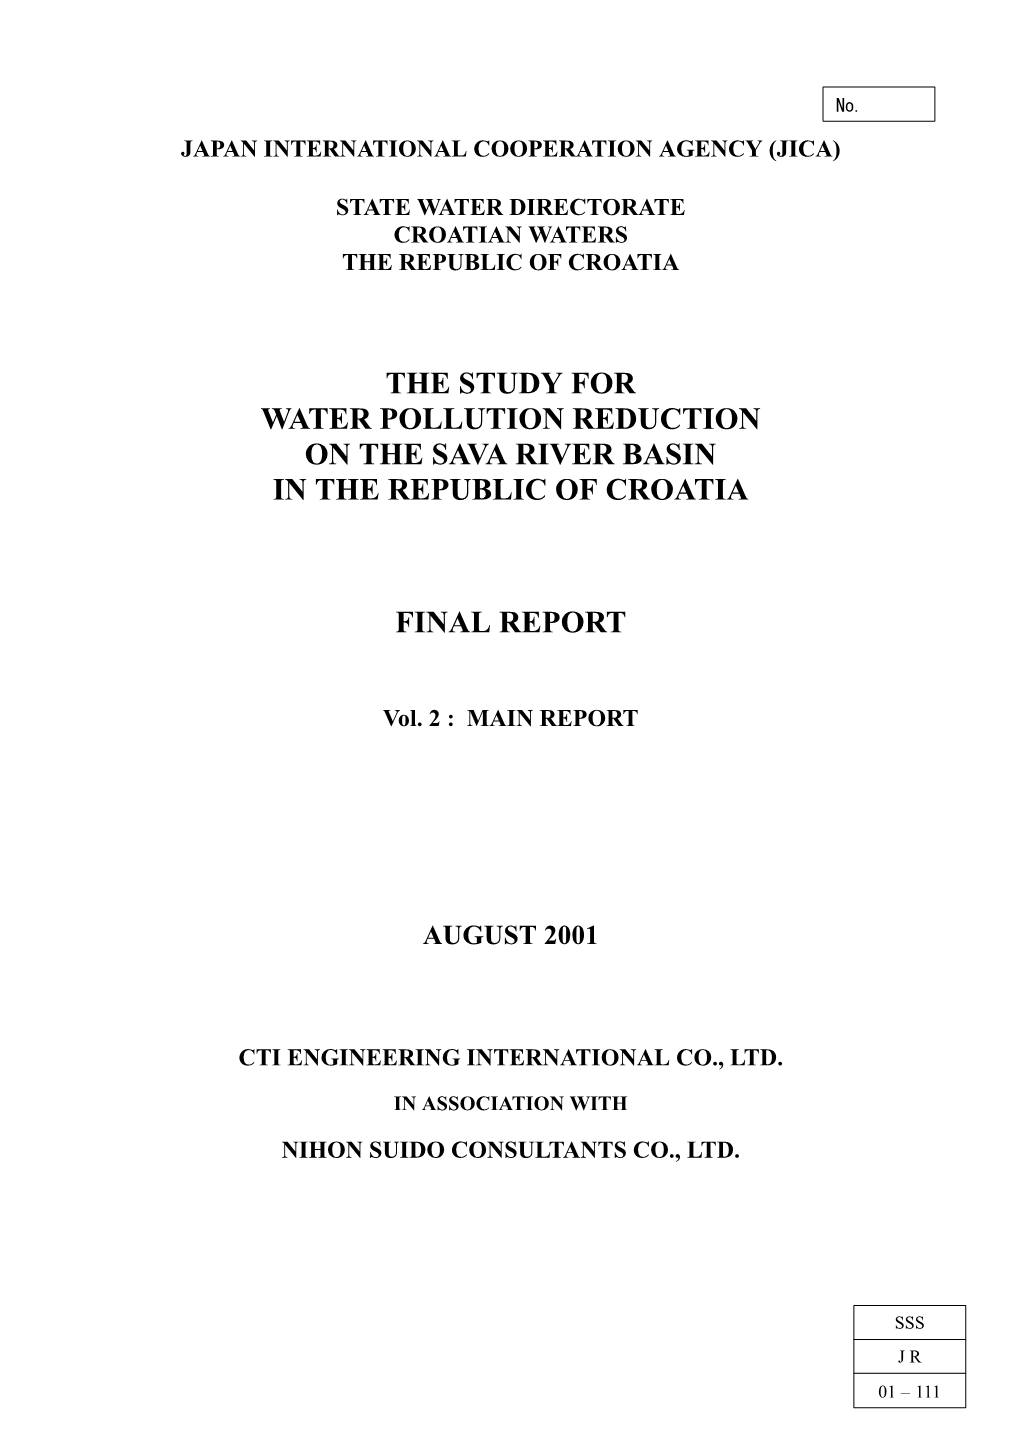 The Study for Water Pollution Reduction on the Sava River Basin in the Republic of Croatia